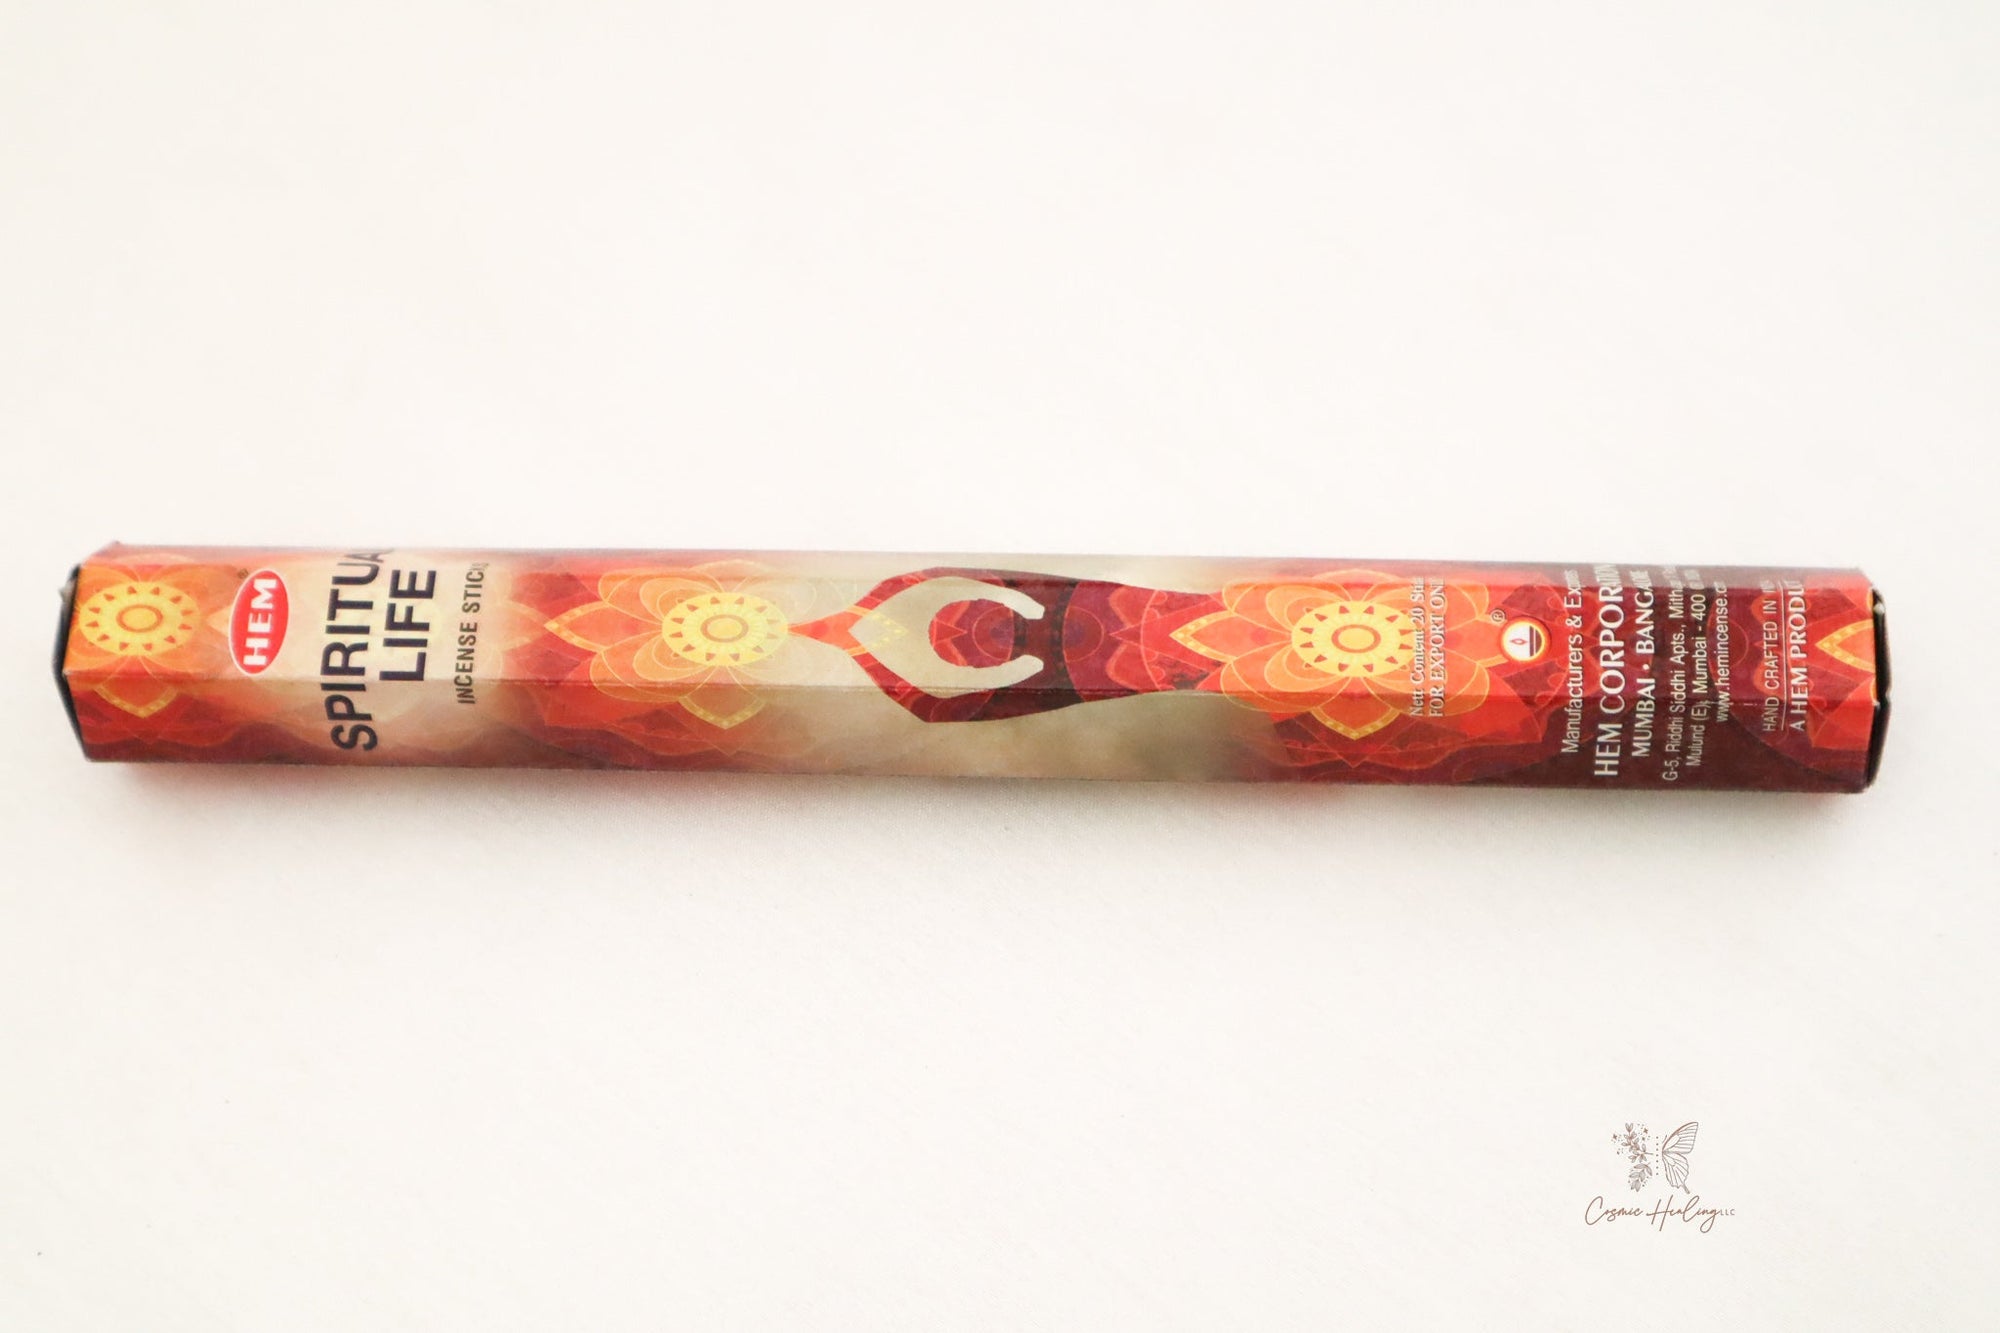 Spiritual Life Incense 20 Sticks, HEM to connect your mind, body, spirit with the ethereal energies - Shop Cosmic Healing